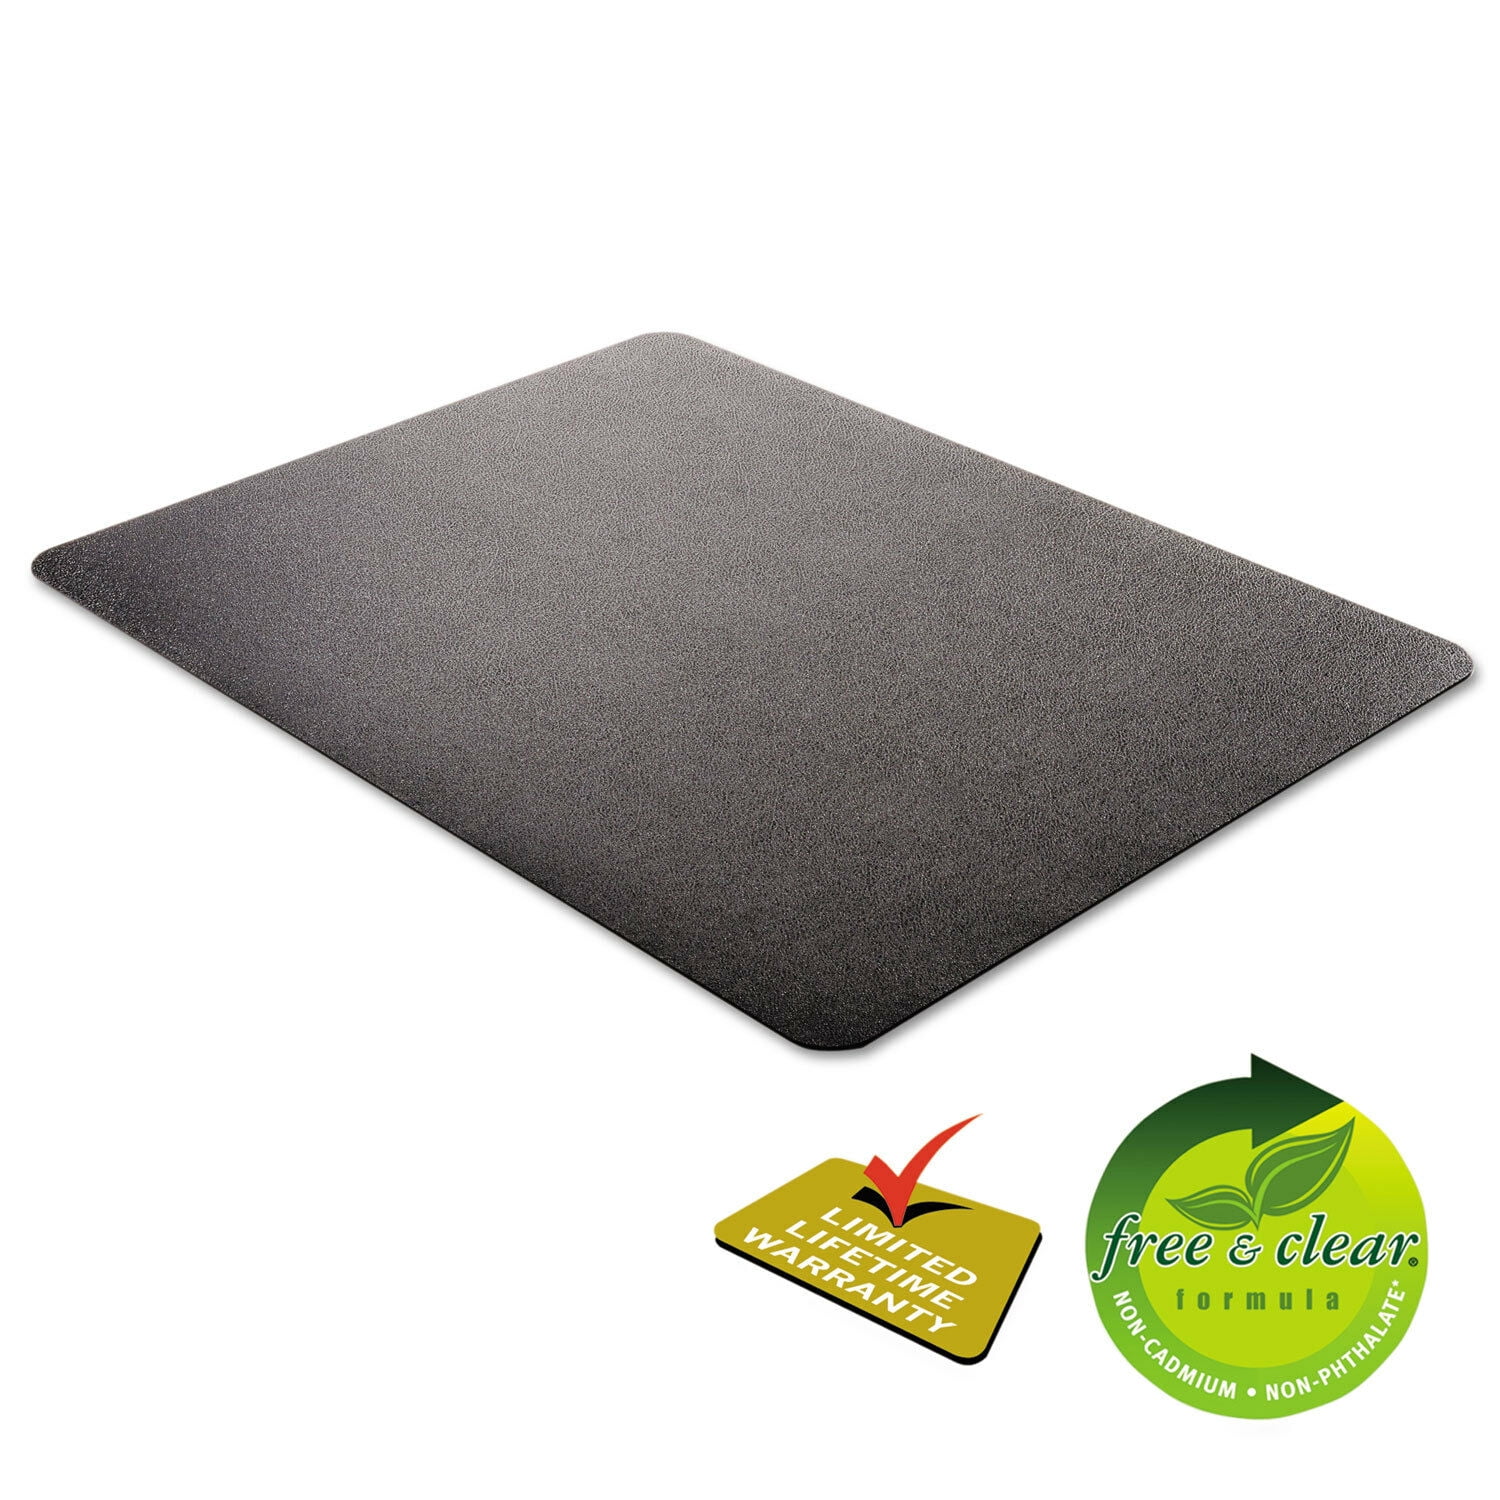 Deflecto EconoMat Anytime Use Chair Mat for Hard Floor 45 x 53 Black CM21242BLK 